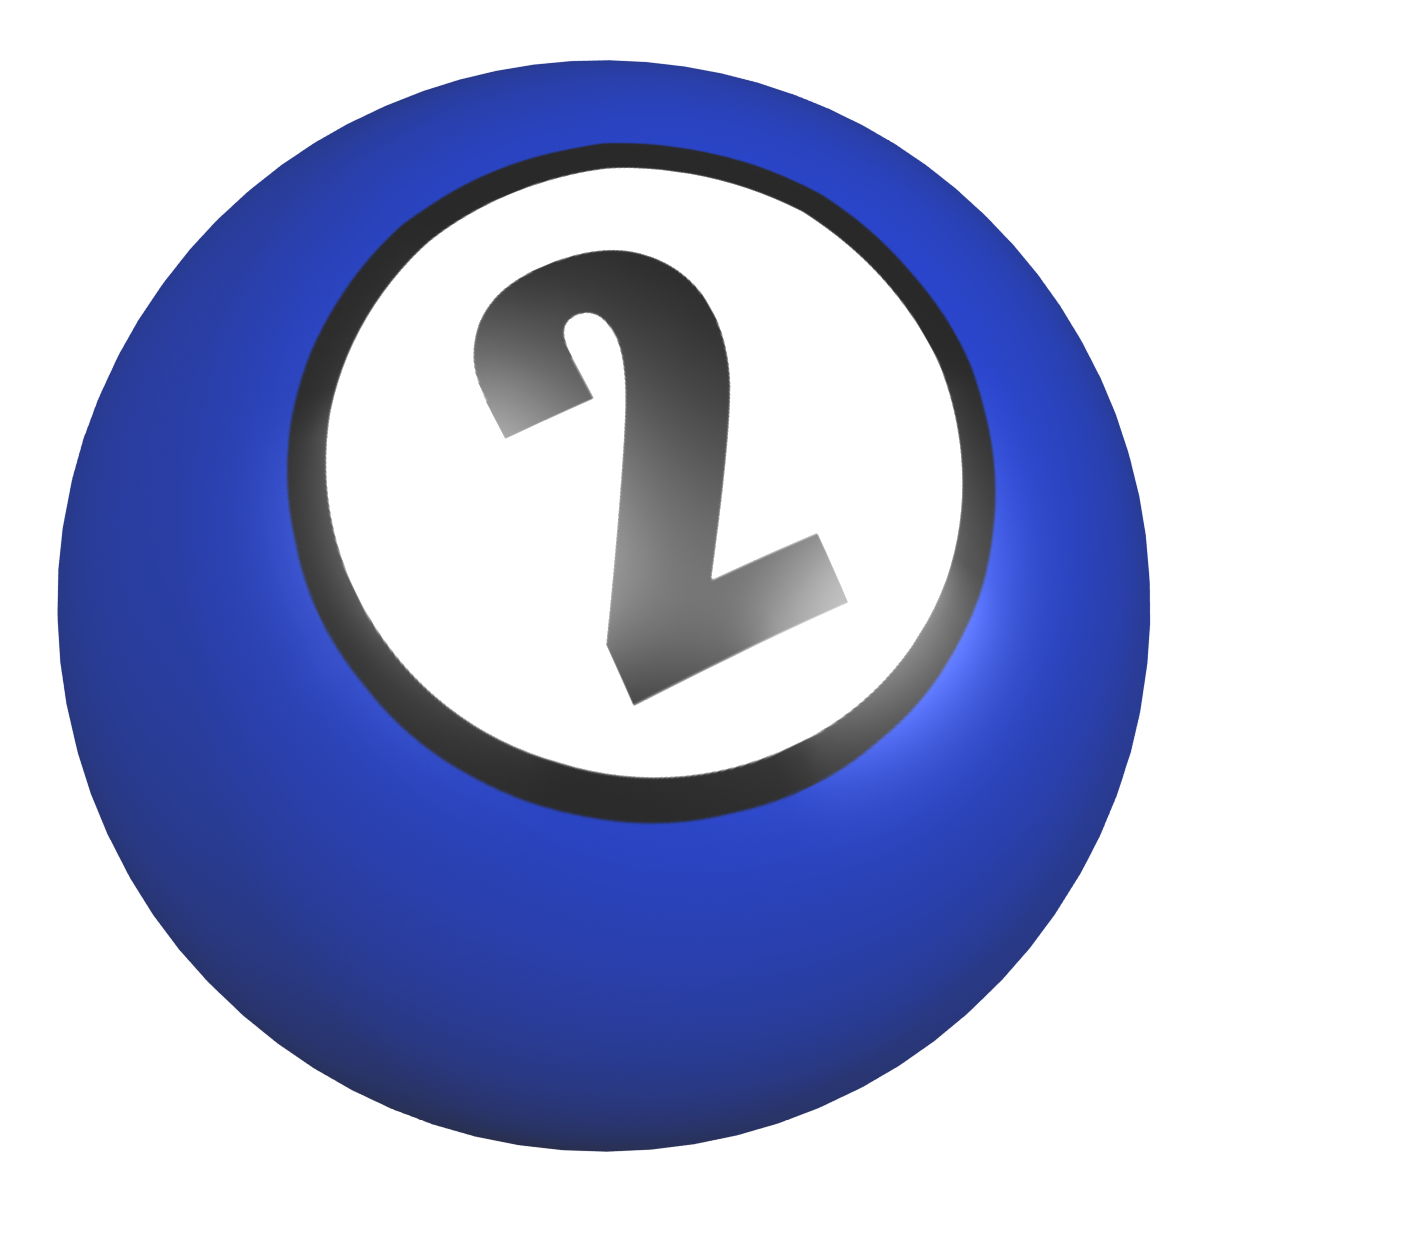 Number 2 Ball With Image From Clipart Free Clip Art Images